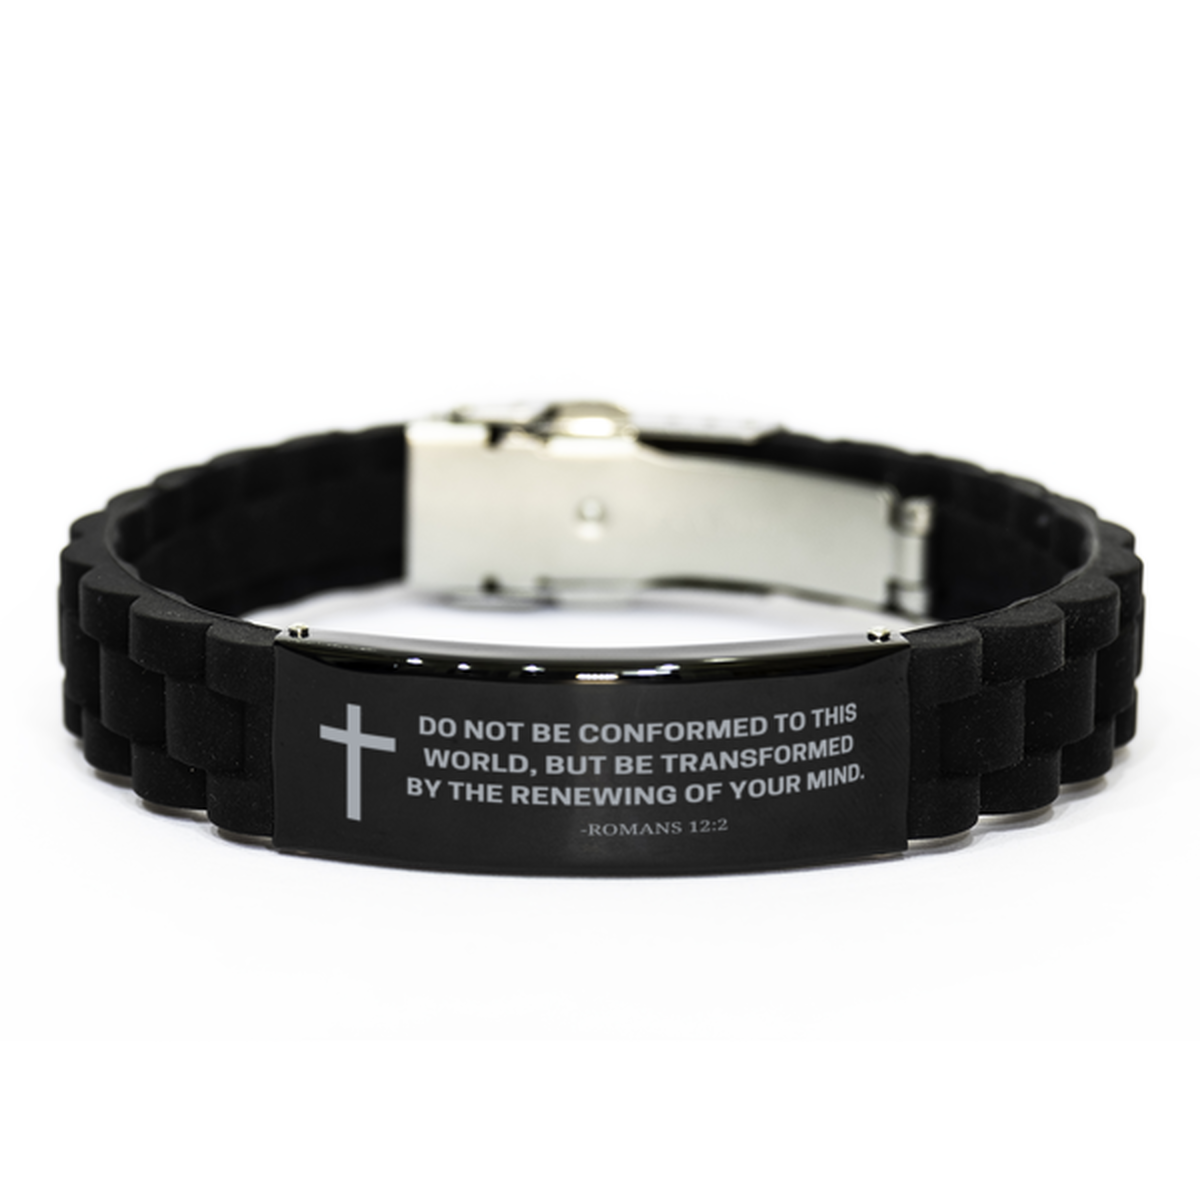 Baptism Gifts For Teenage Boys Girls, Christian Bible Verse Black Glidelock Clasp Bracelet, Do not be conformed to this world, Catholic Confirmation Gifts for Son, Godson, Grandson, Nephew